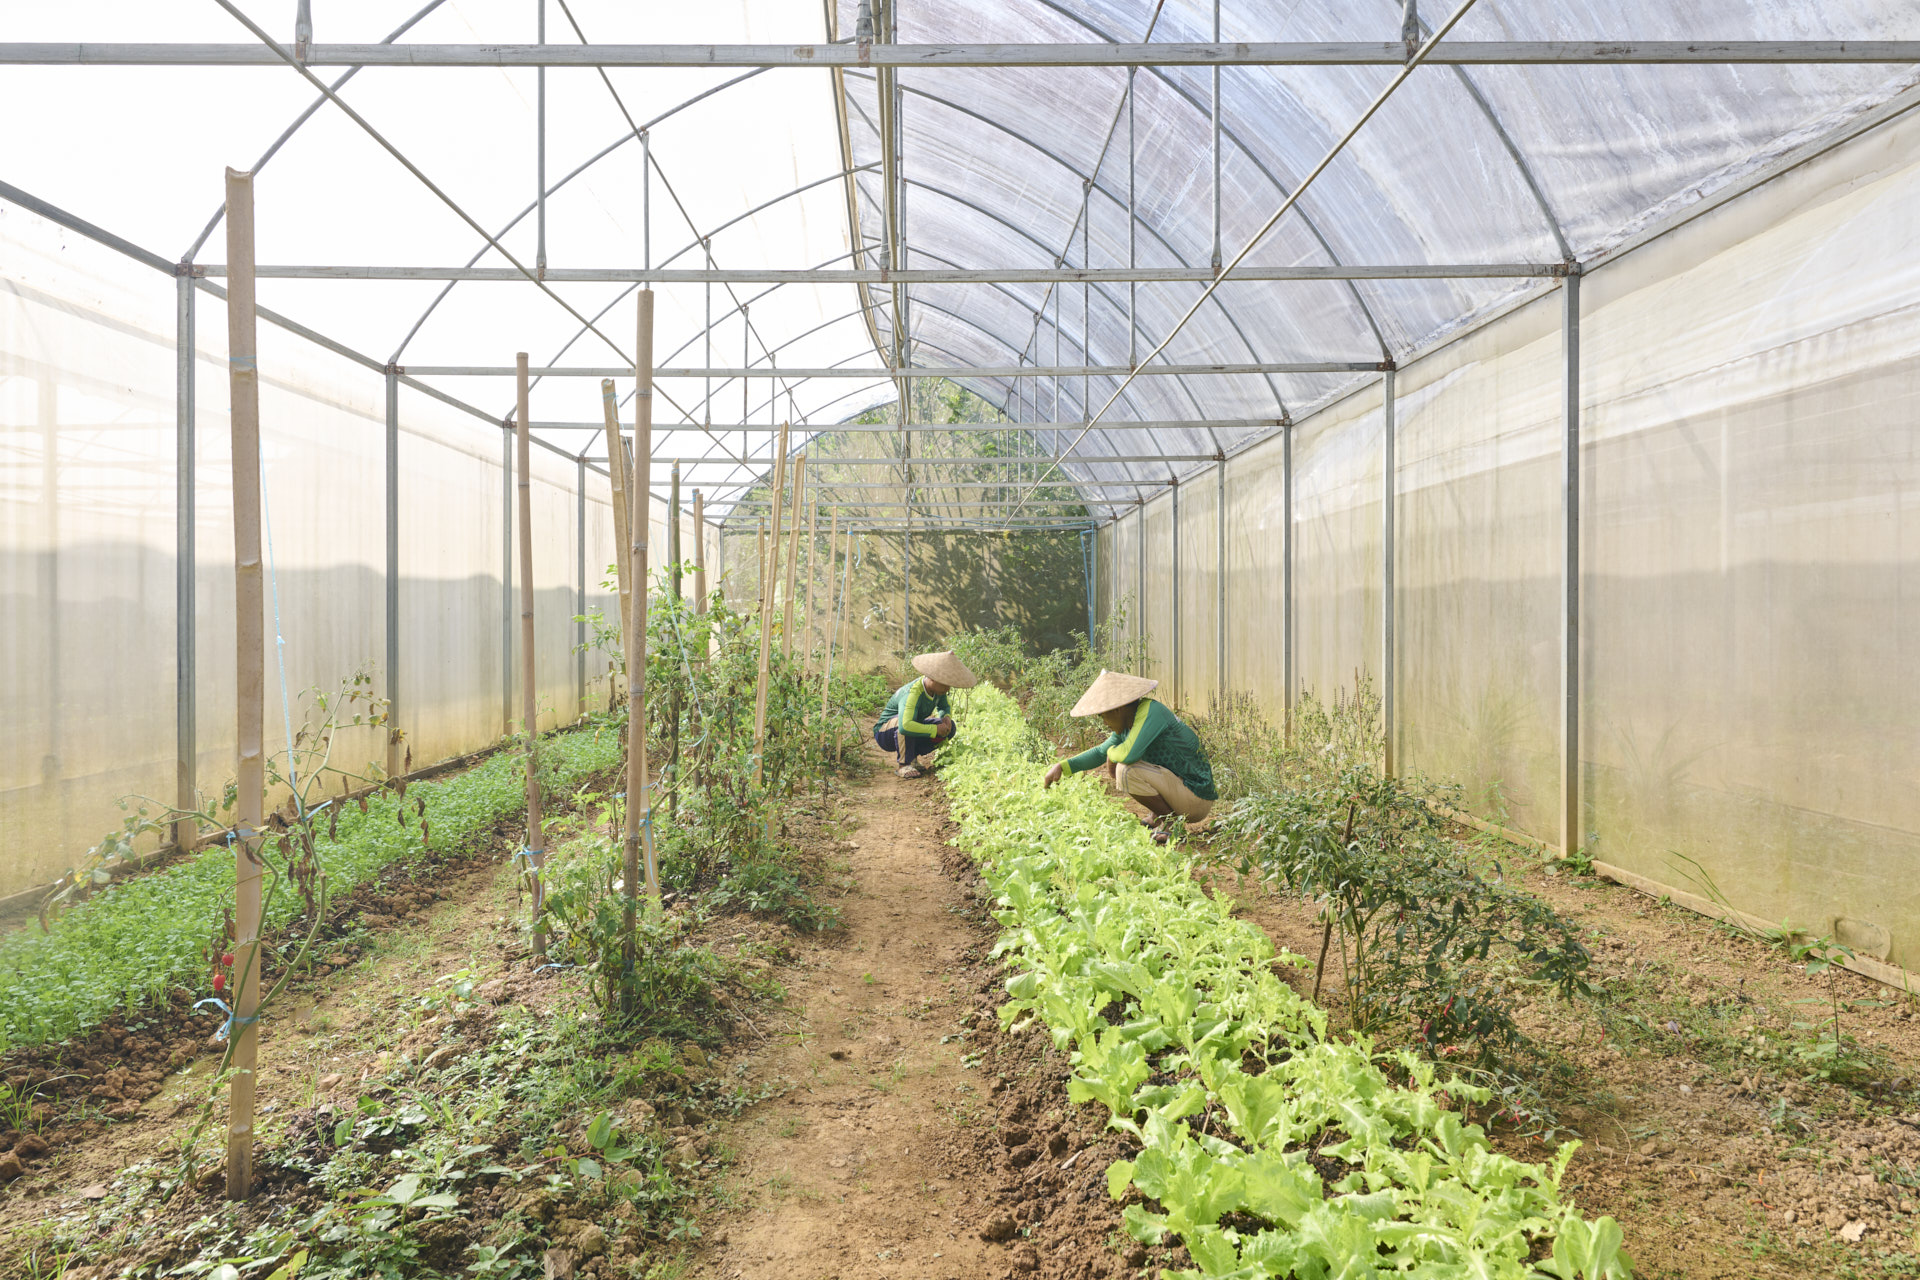 Two people working in a greenhouse in Luang Prabang.